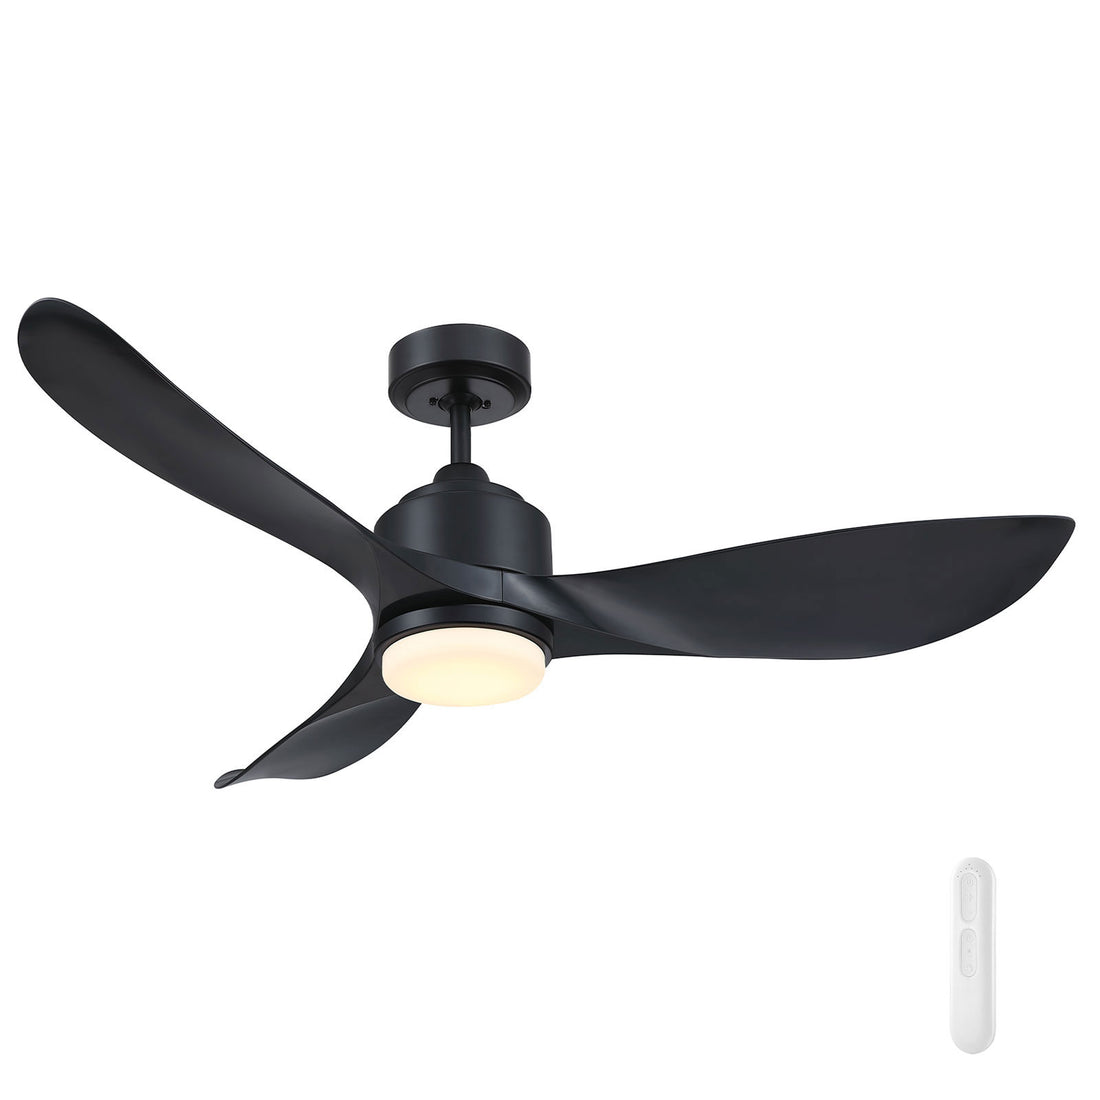 Eagle II Lite 122cm DC Ceiling Fan with Remote and LED Light